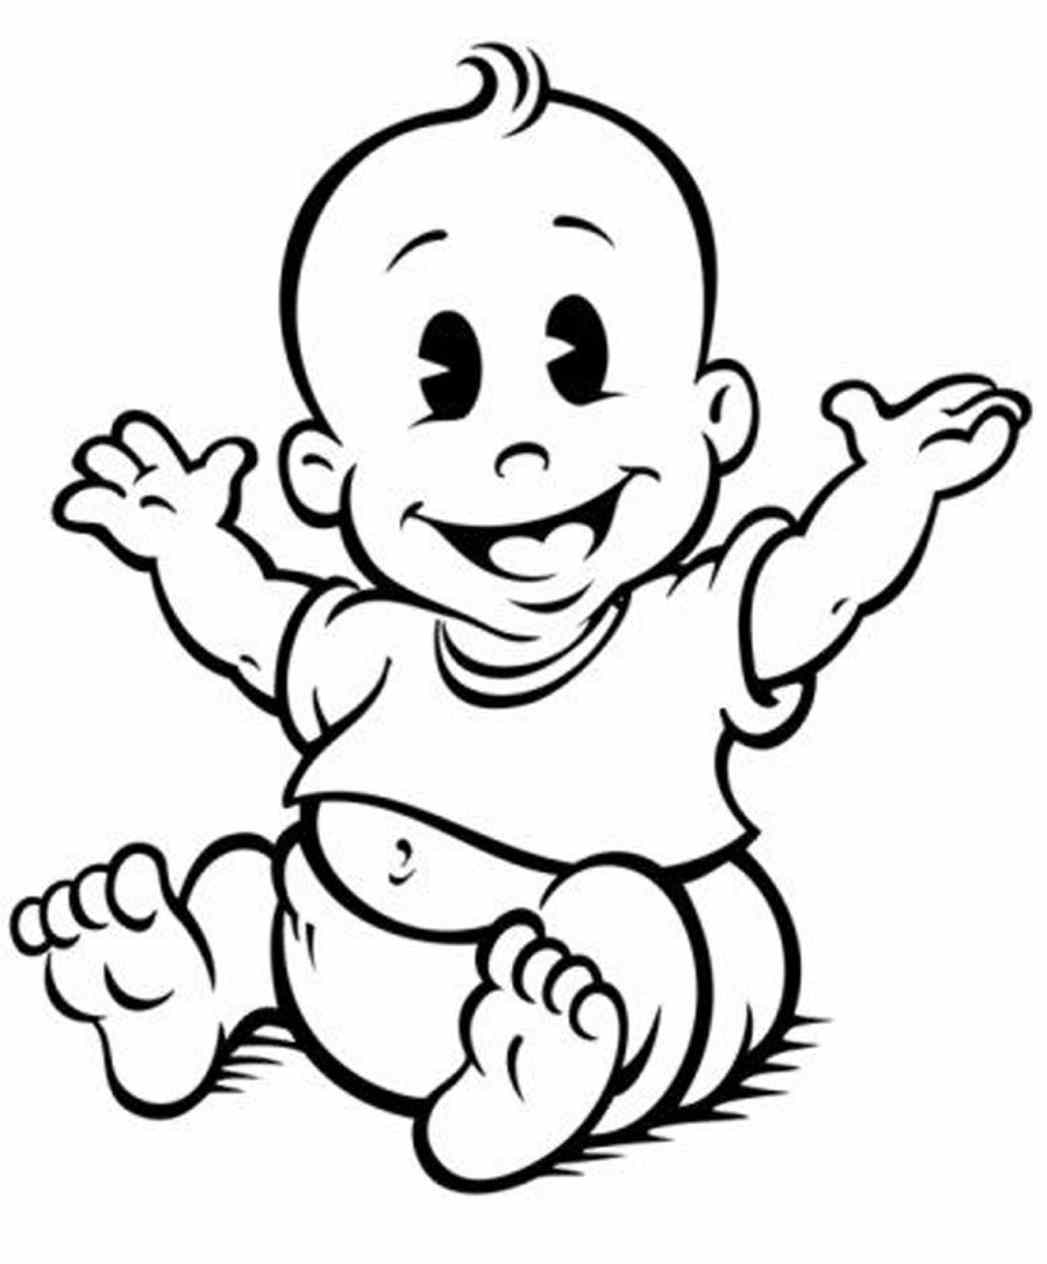 clipart black and white baby